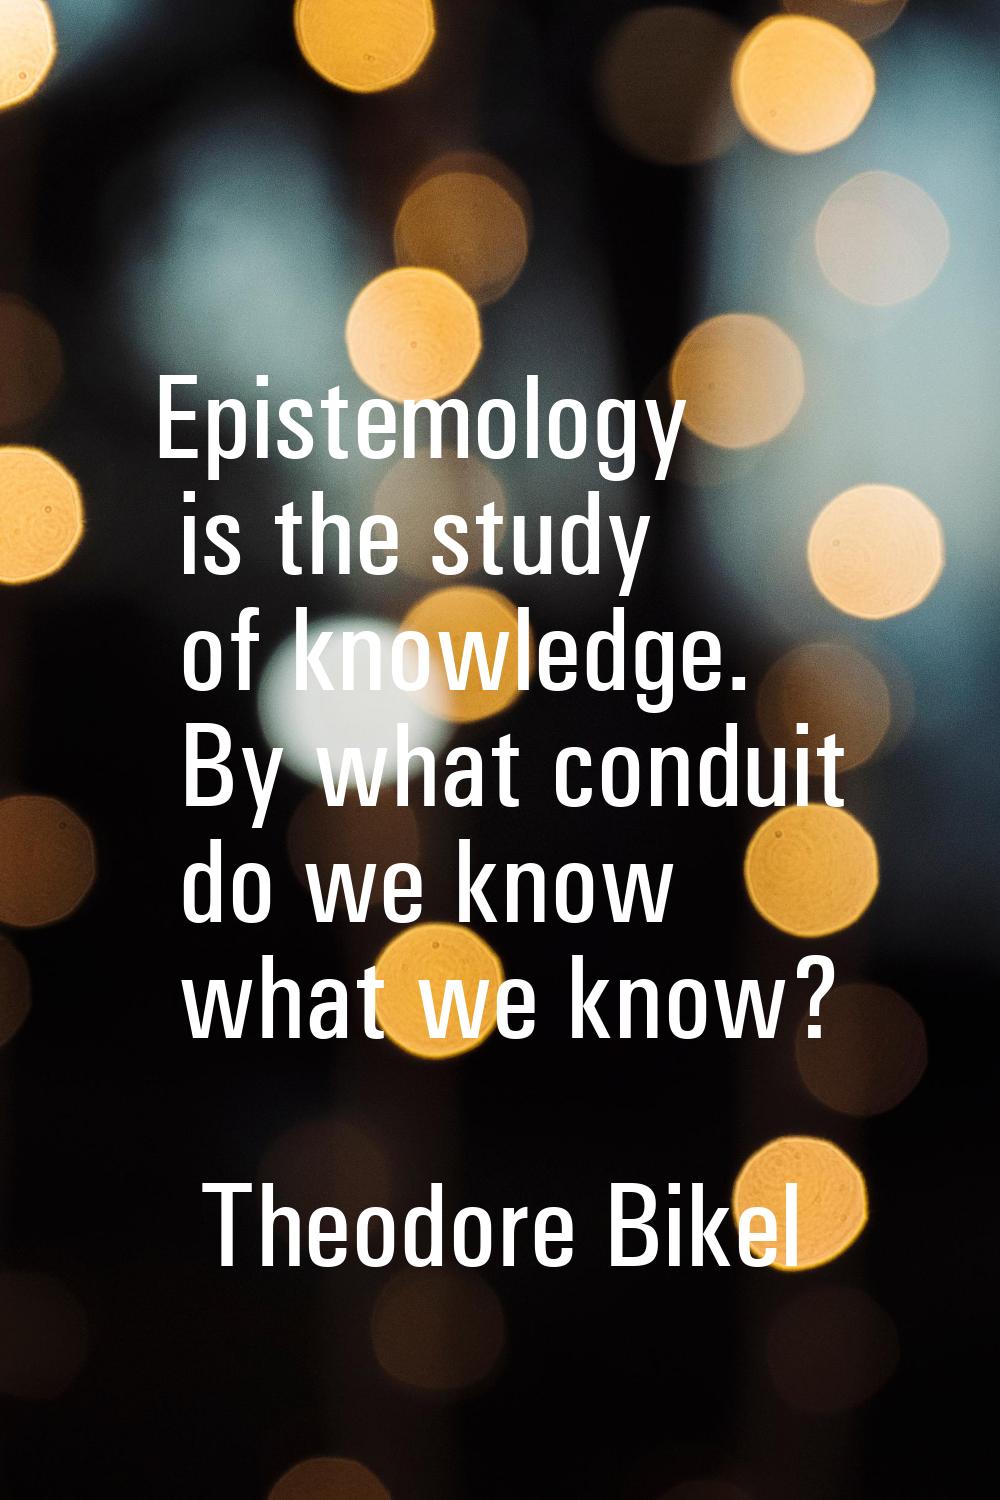 Epistemology is the study of knowledge. By what conduit do we know what we know?